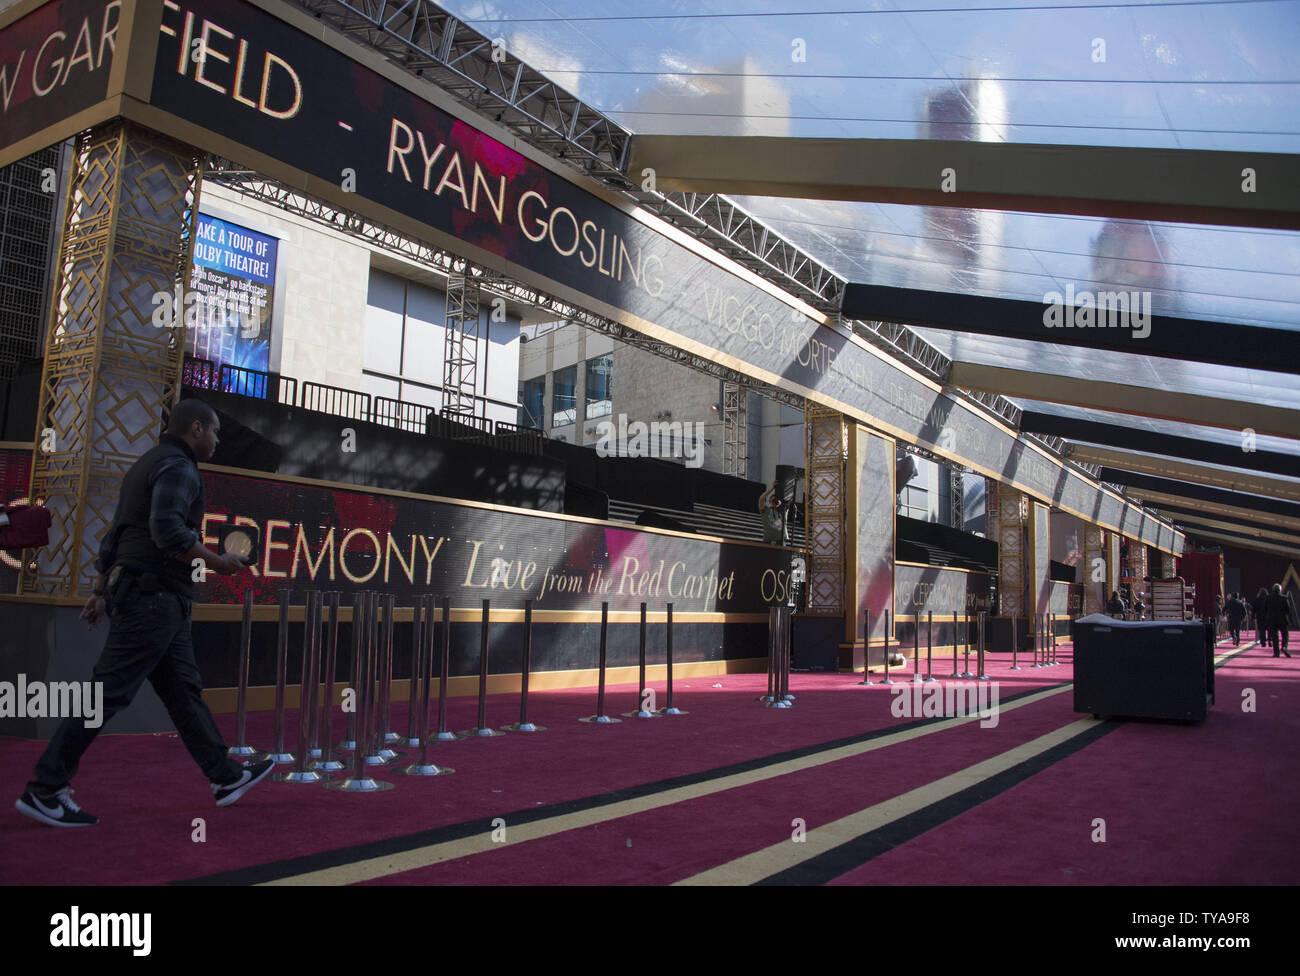 A man walks on the red carpet as preparations are underway for the 89th annual Academy Awards in the Hollywood section of Los Angeles on February 24, 2017. The 2017 Academy Awards will take place this Sunday, February 25. Photo by Kevin Dietsch/UPI Stock Photo